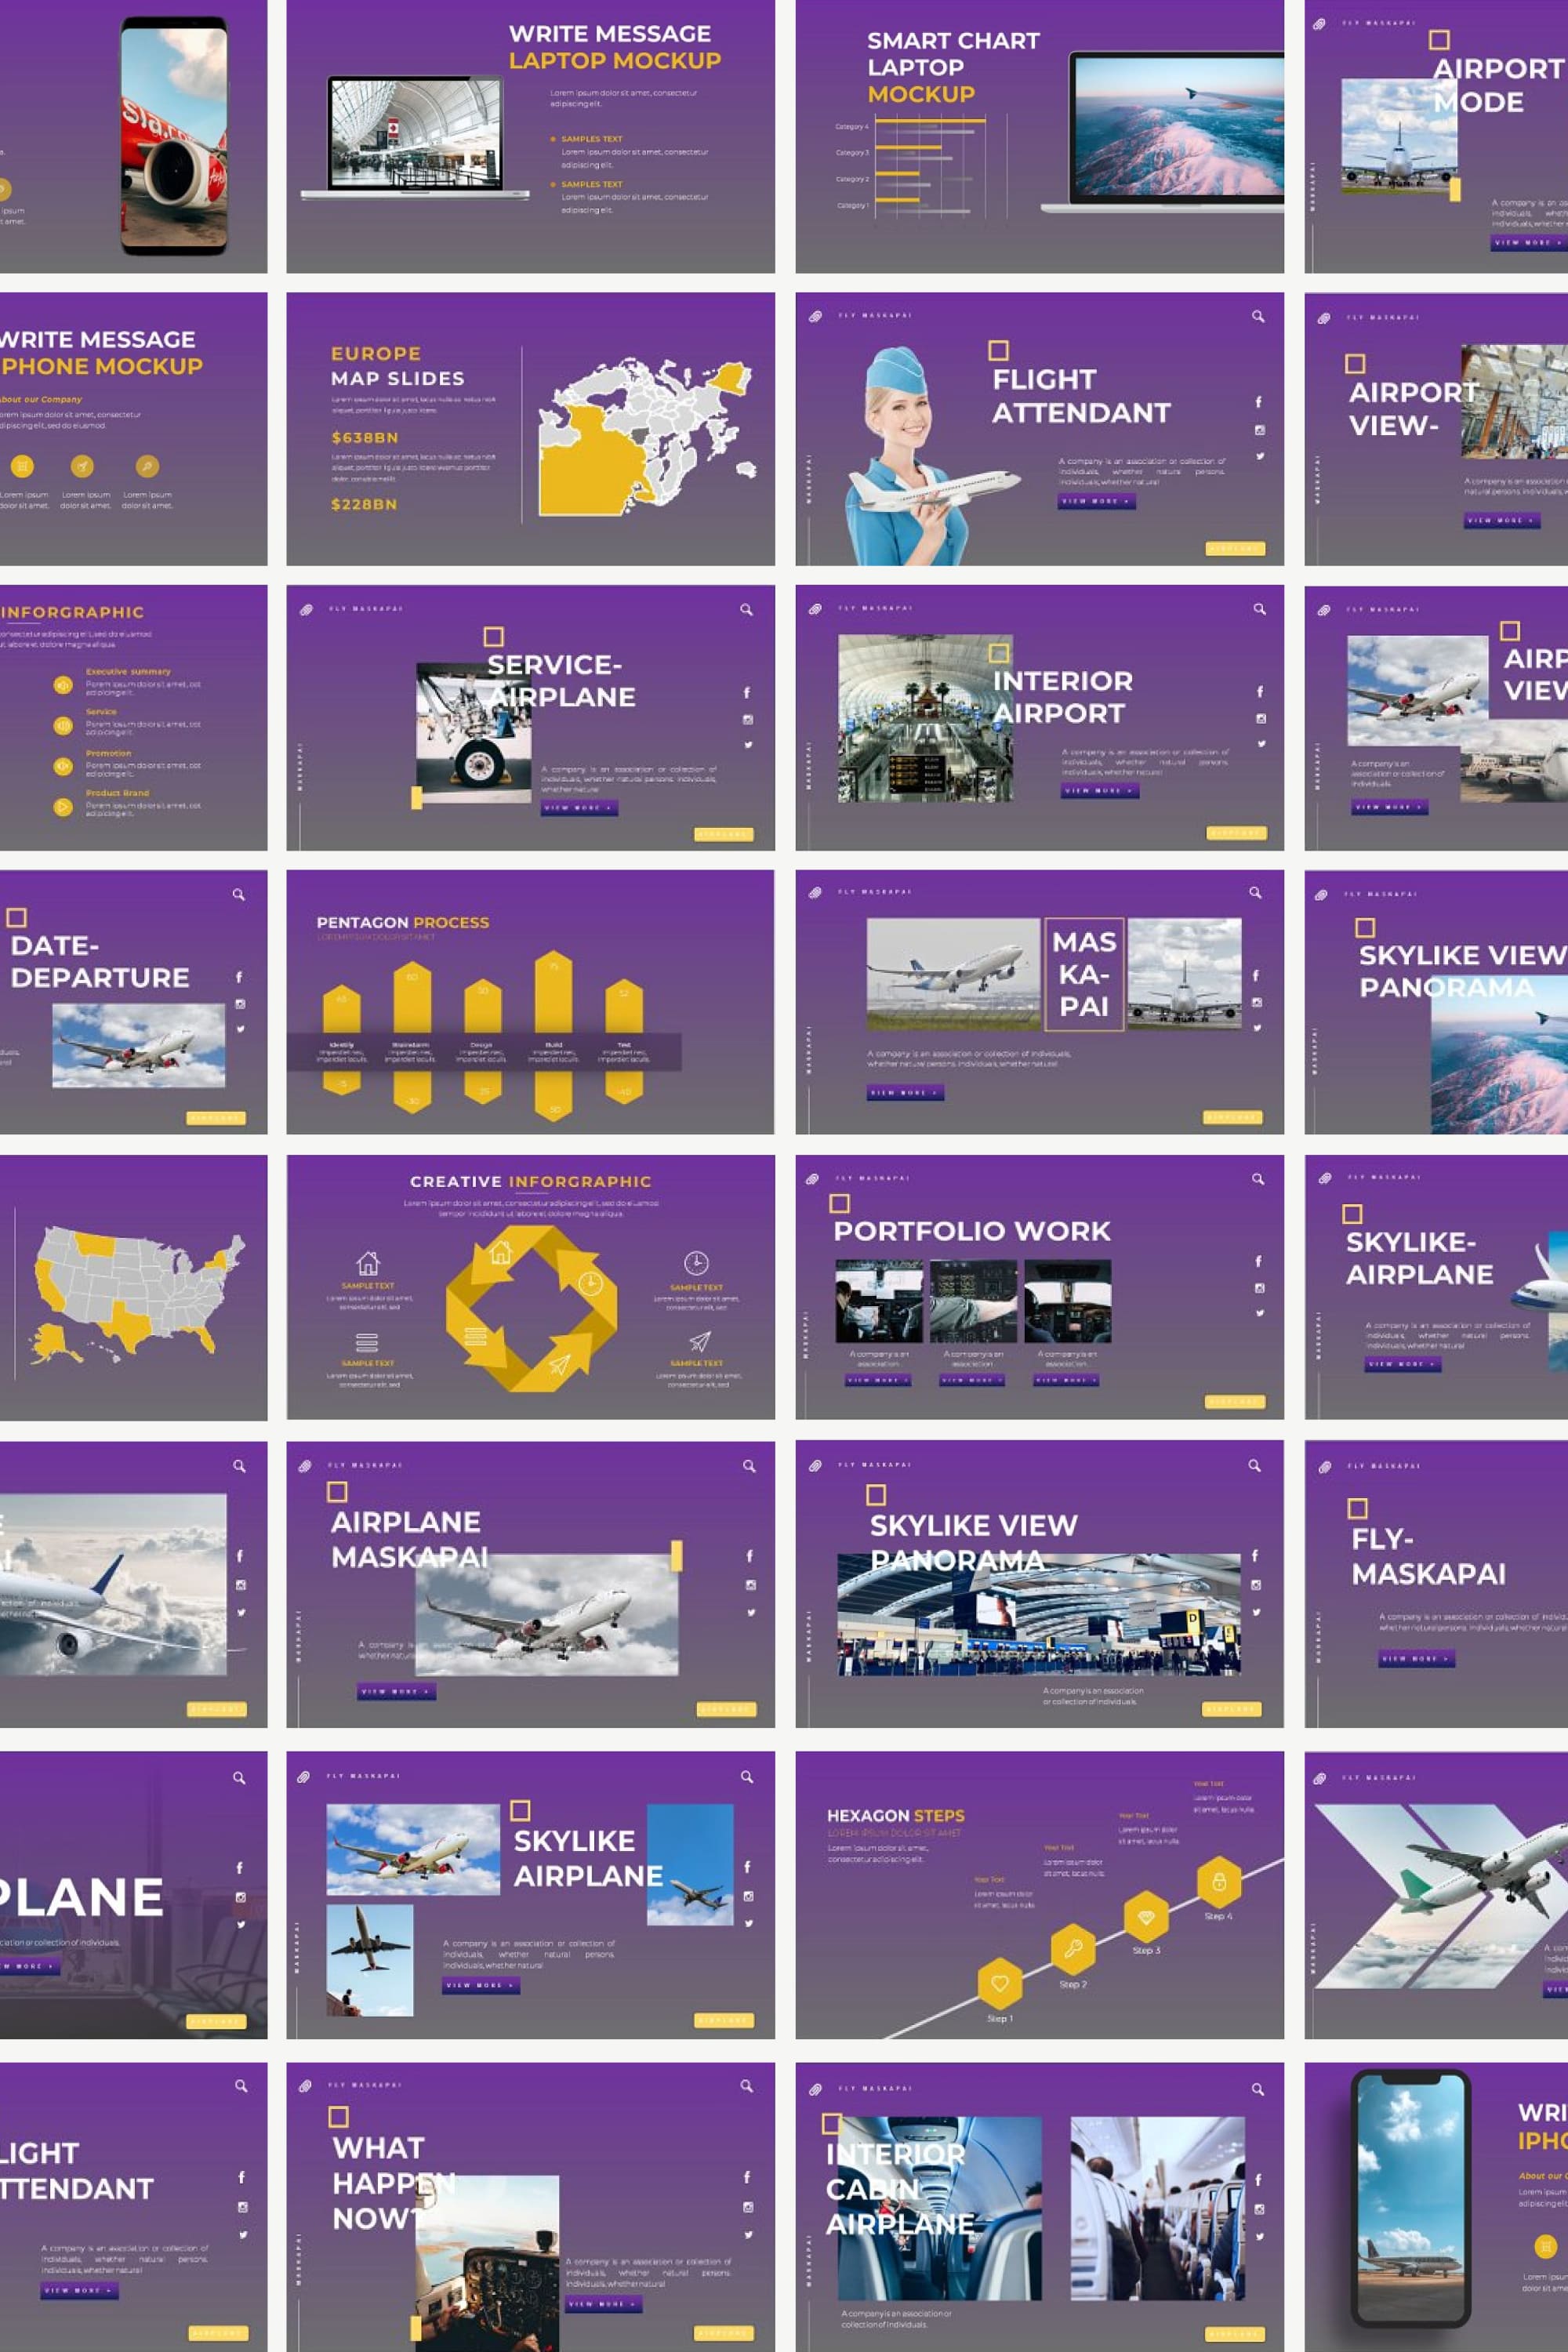 Maskapai airline powerpoint - pinterest image preview.